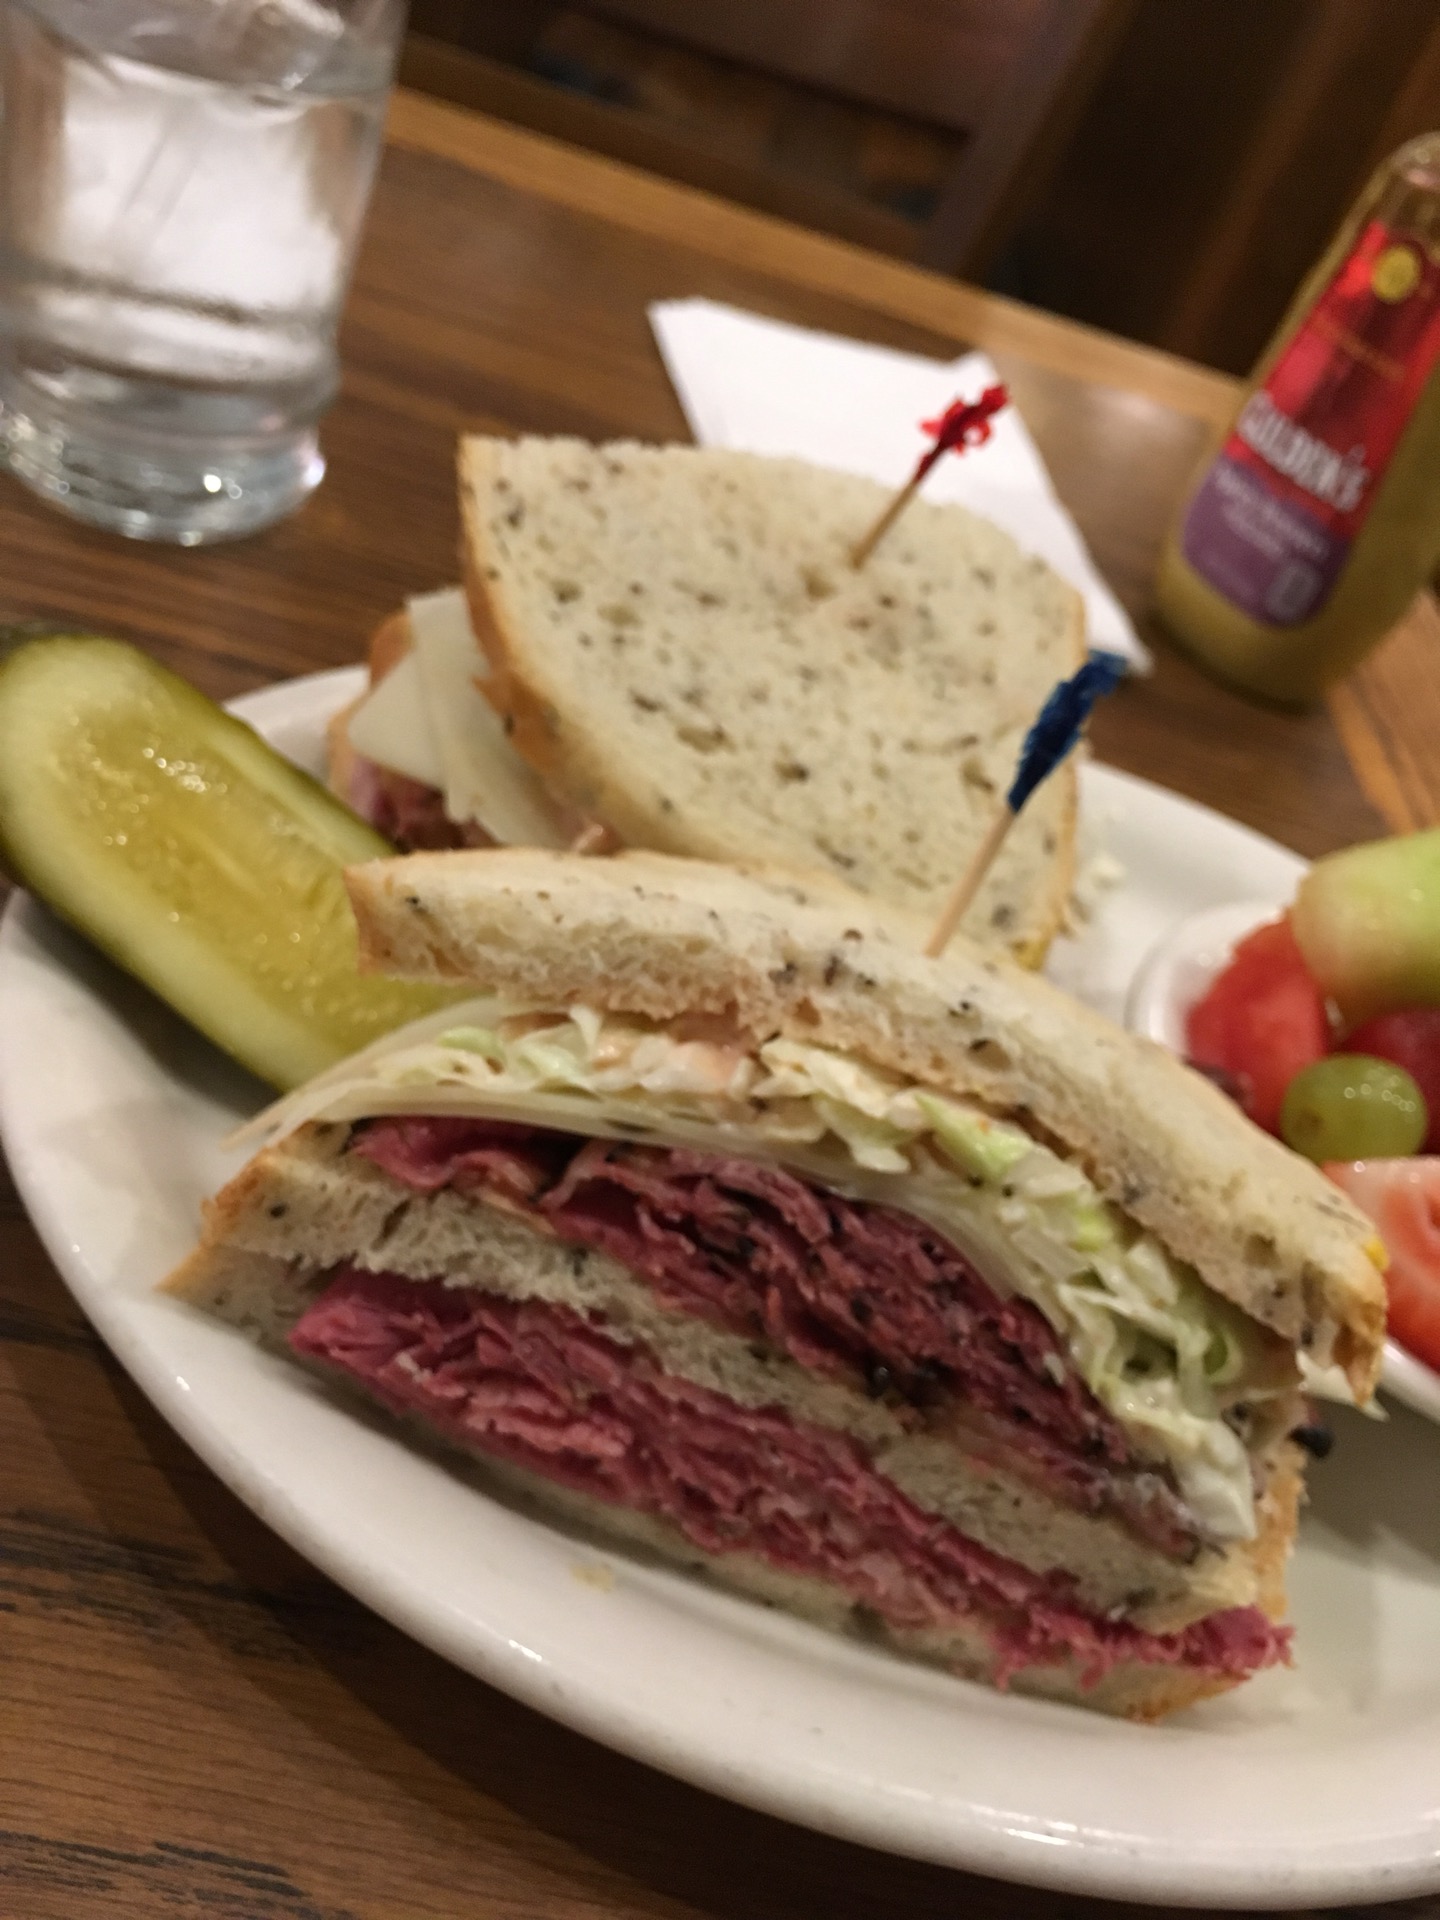 loved the corn beef/pastrami sandwich